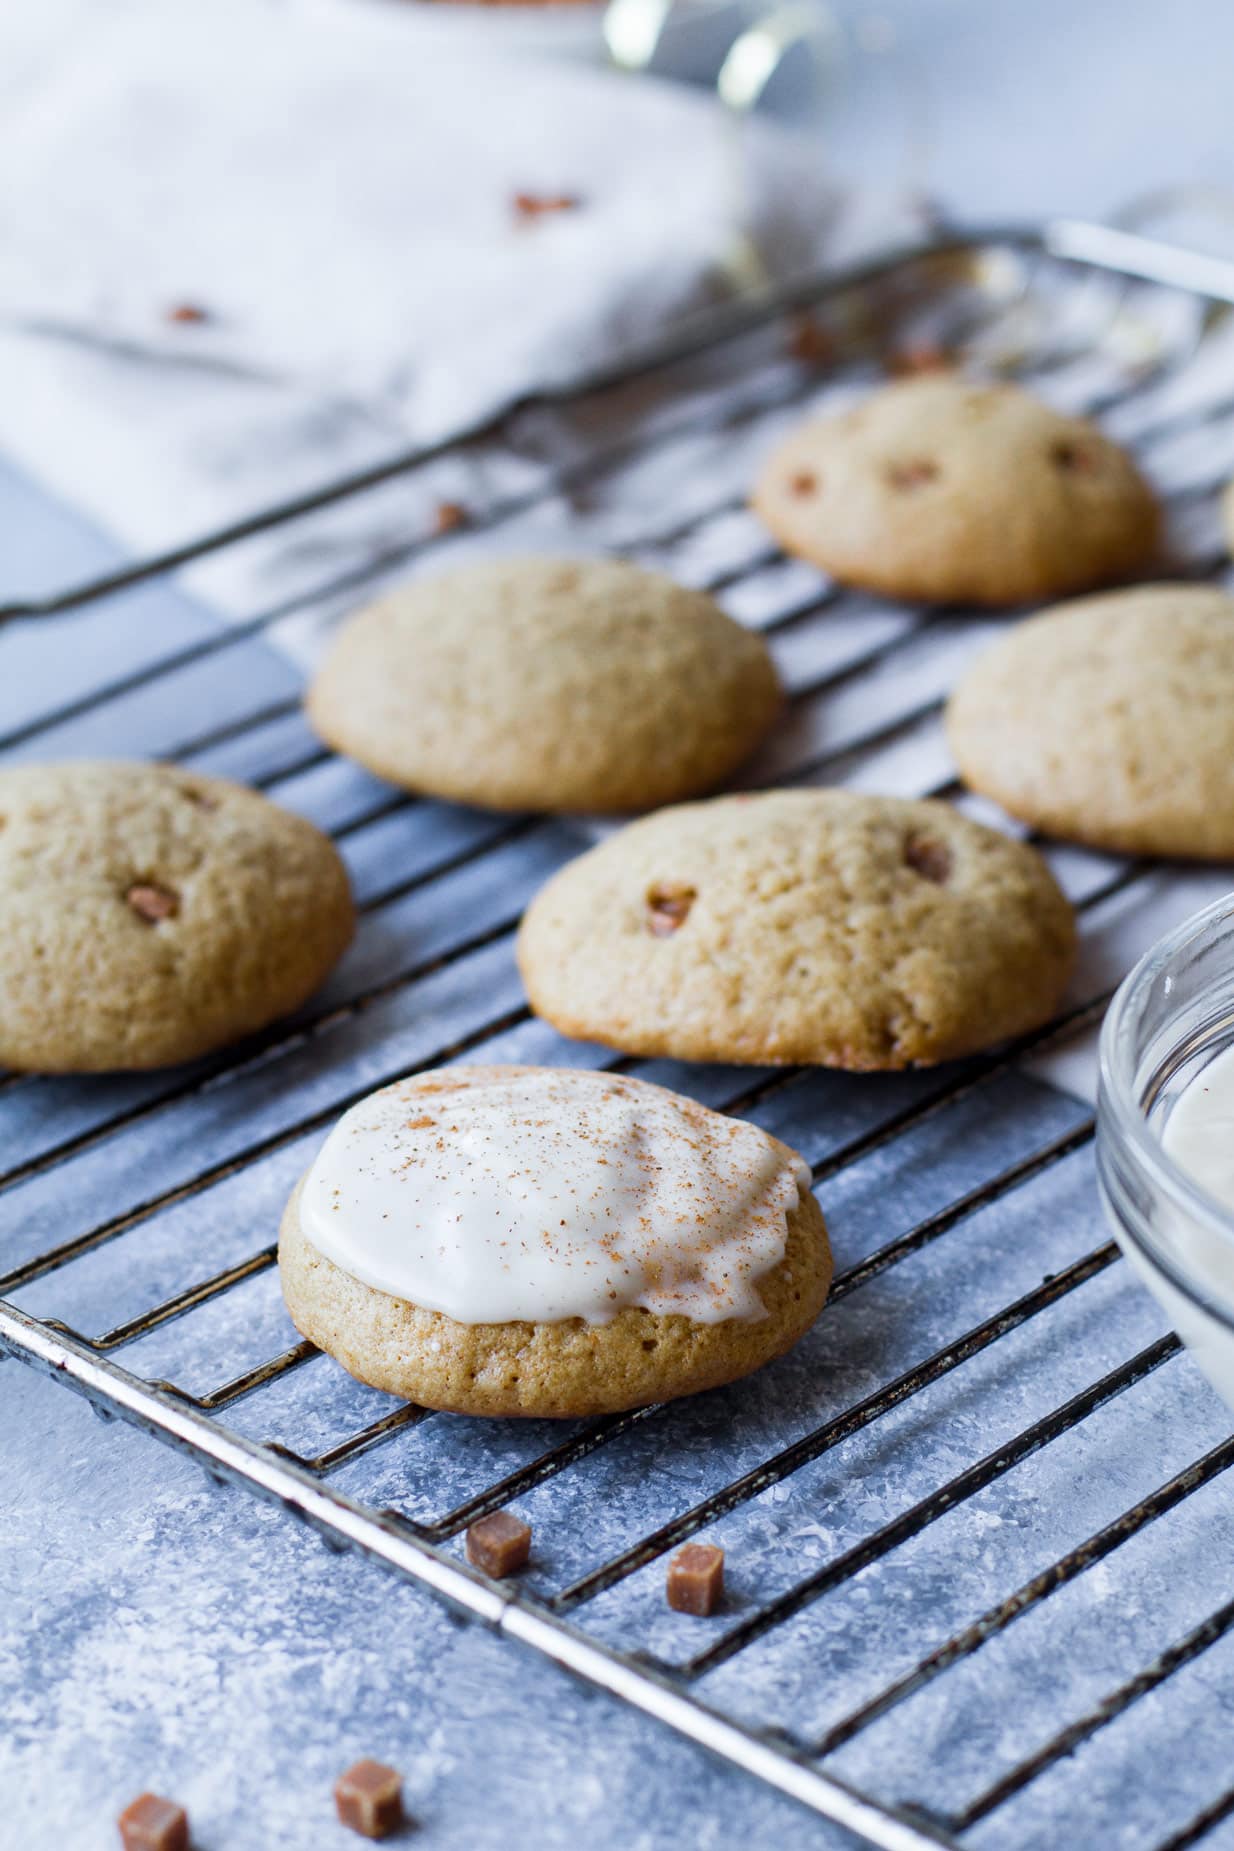 Vixen's Soft and Chewy Eggnog Cookies